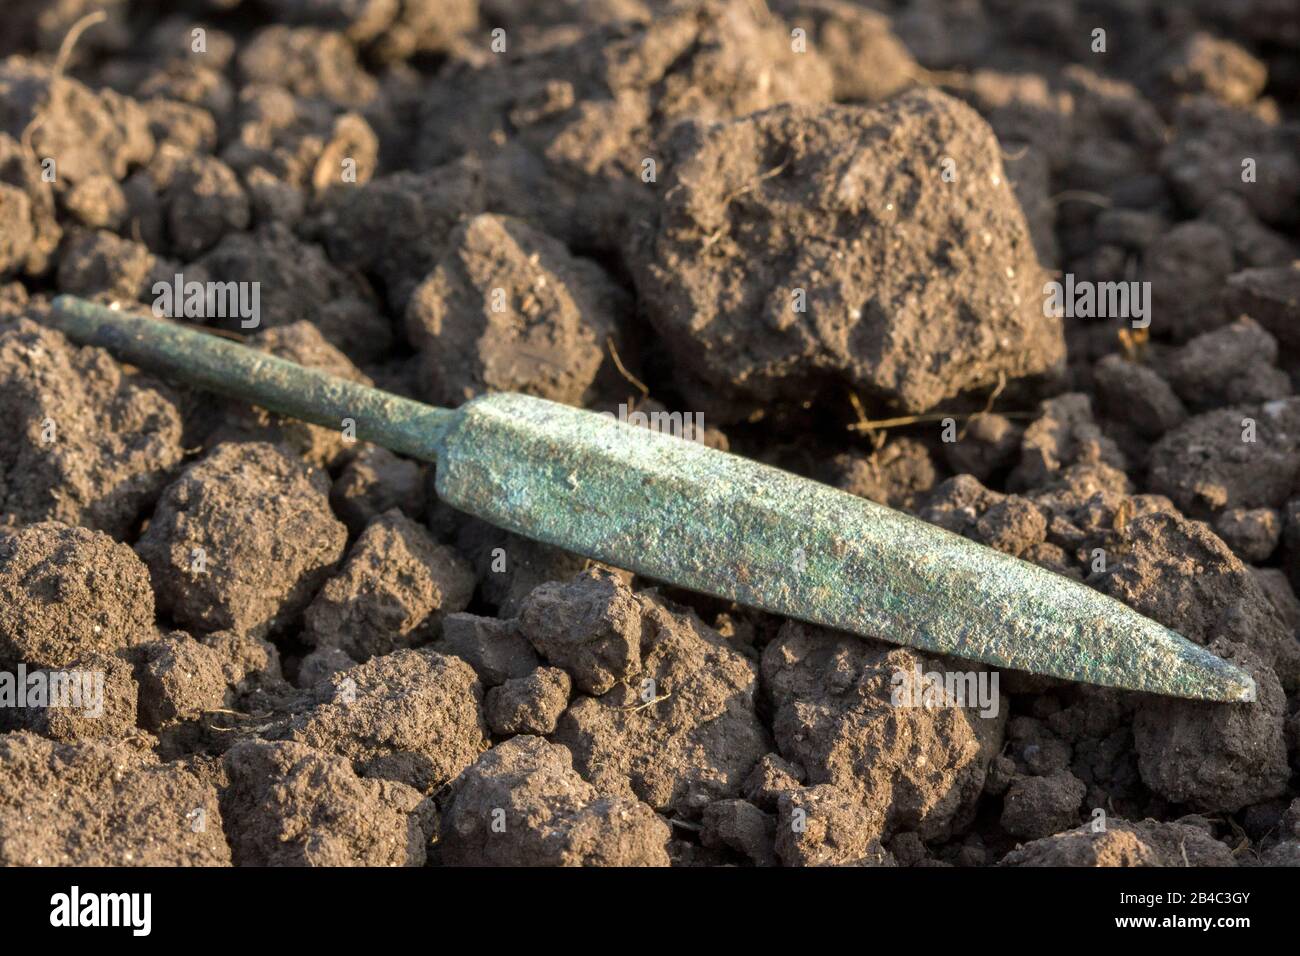 spearhead, ancient archeological finding Stock Photo